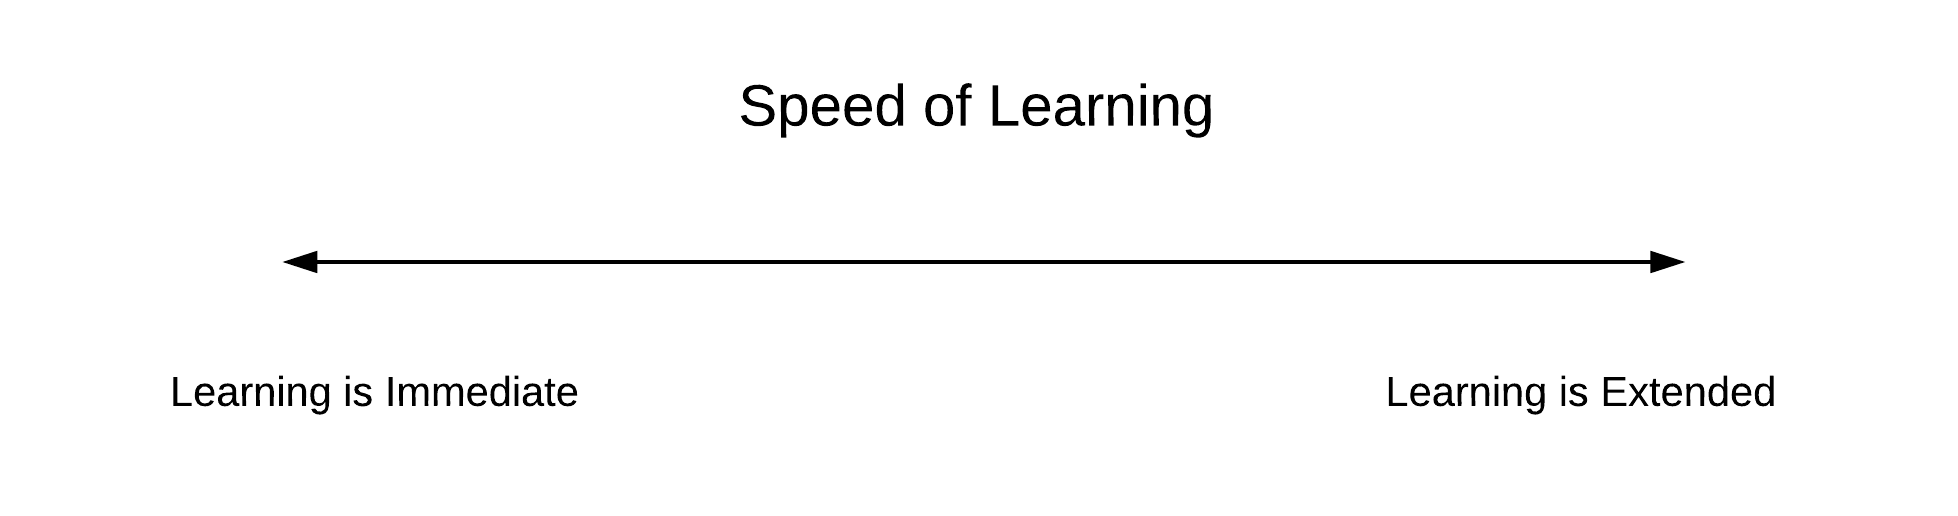 speed of learning